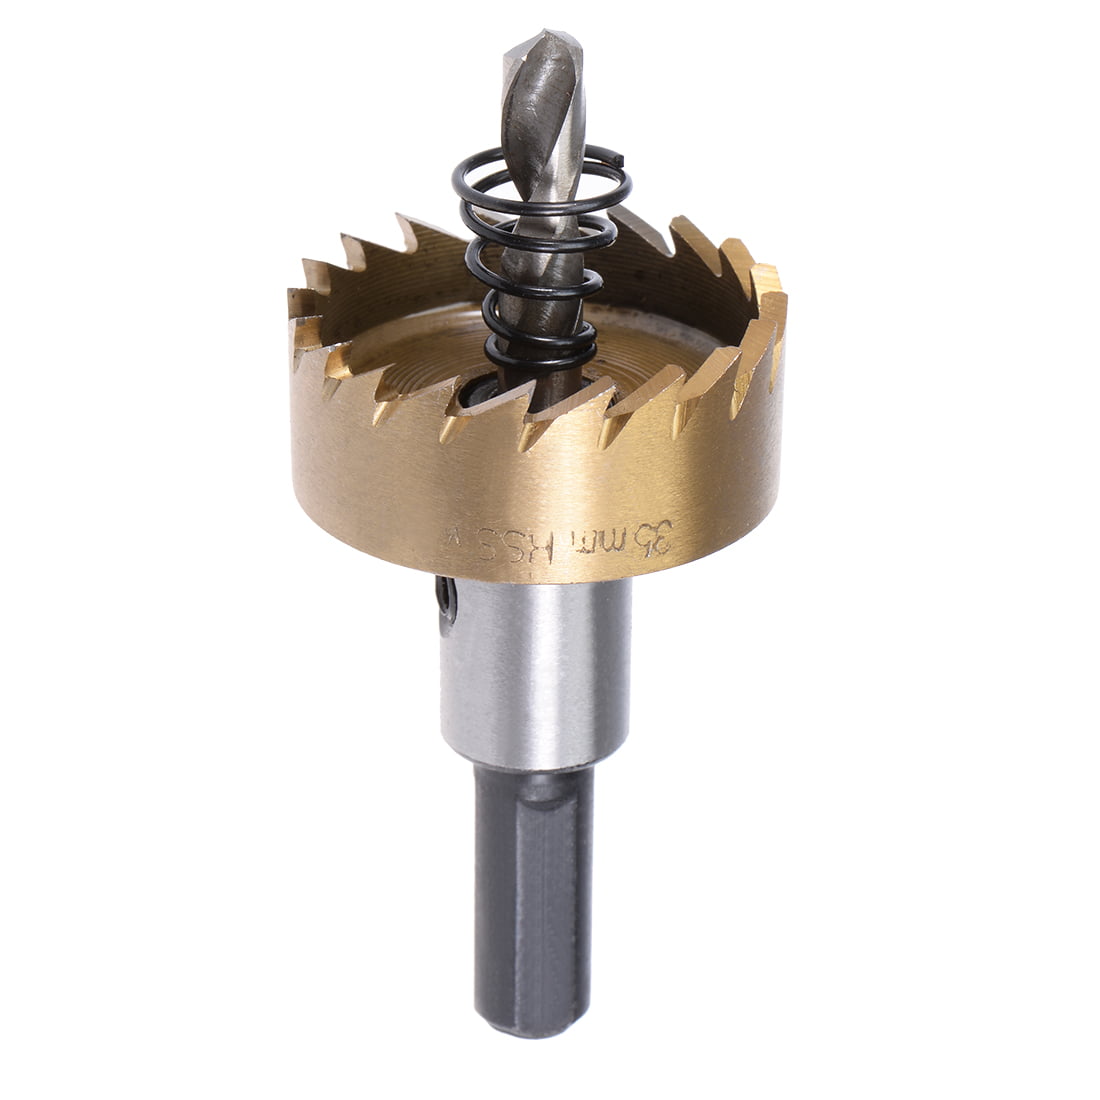 Hole Saw Drill Bit 12-60mm M35 HSS Cobalt for Stainless Steel Metal Wood Plastic